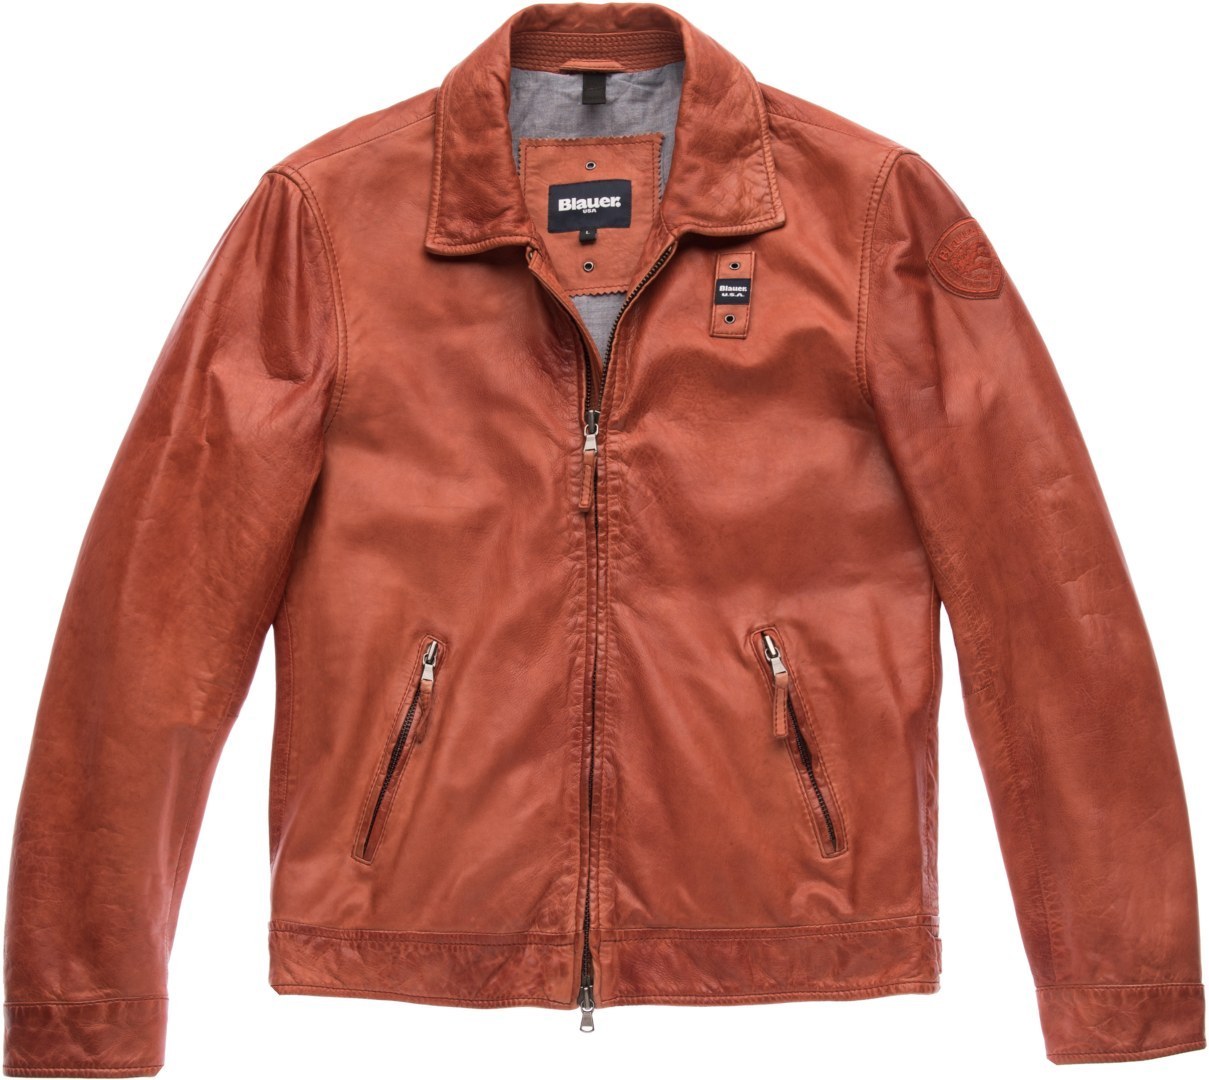 Image of Blauer USA Jackson Giacca in pelle, rosso, dimensione S